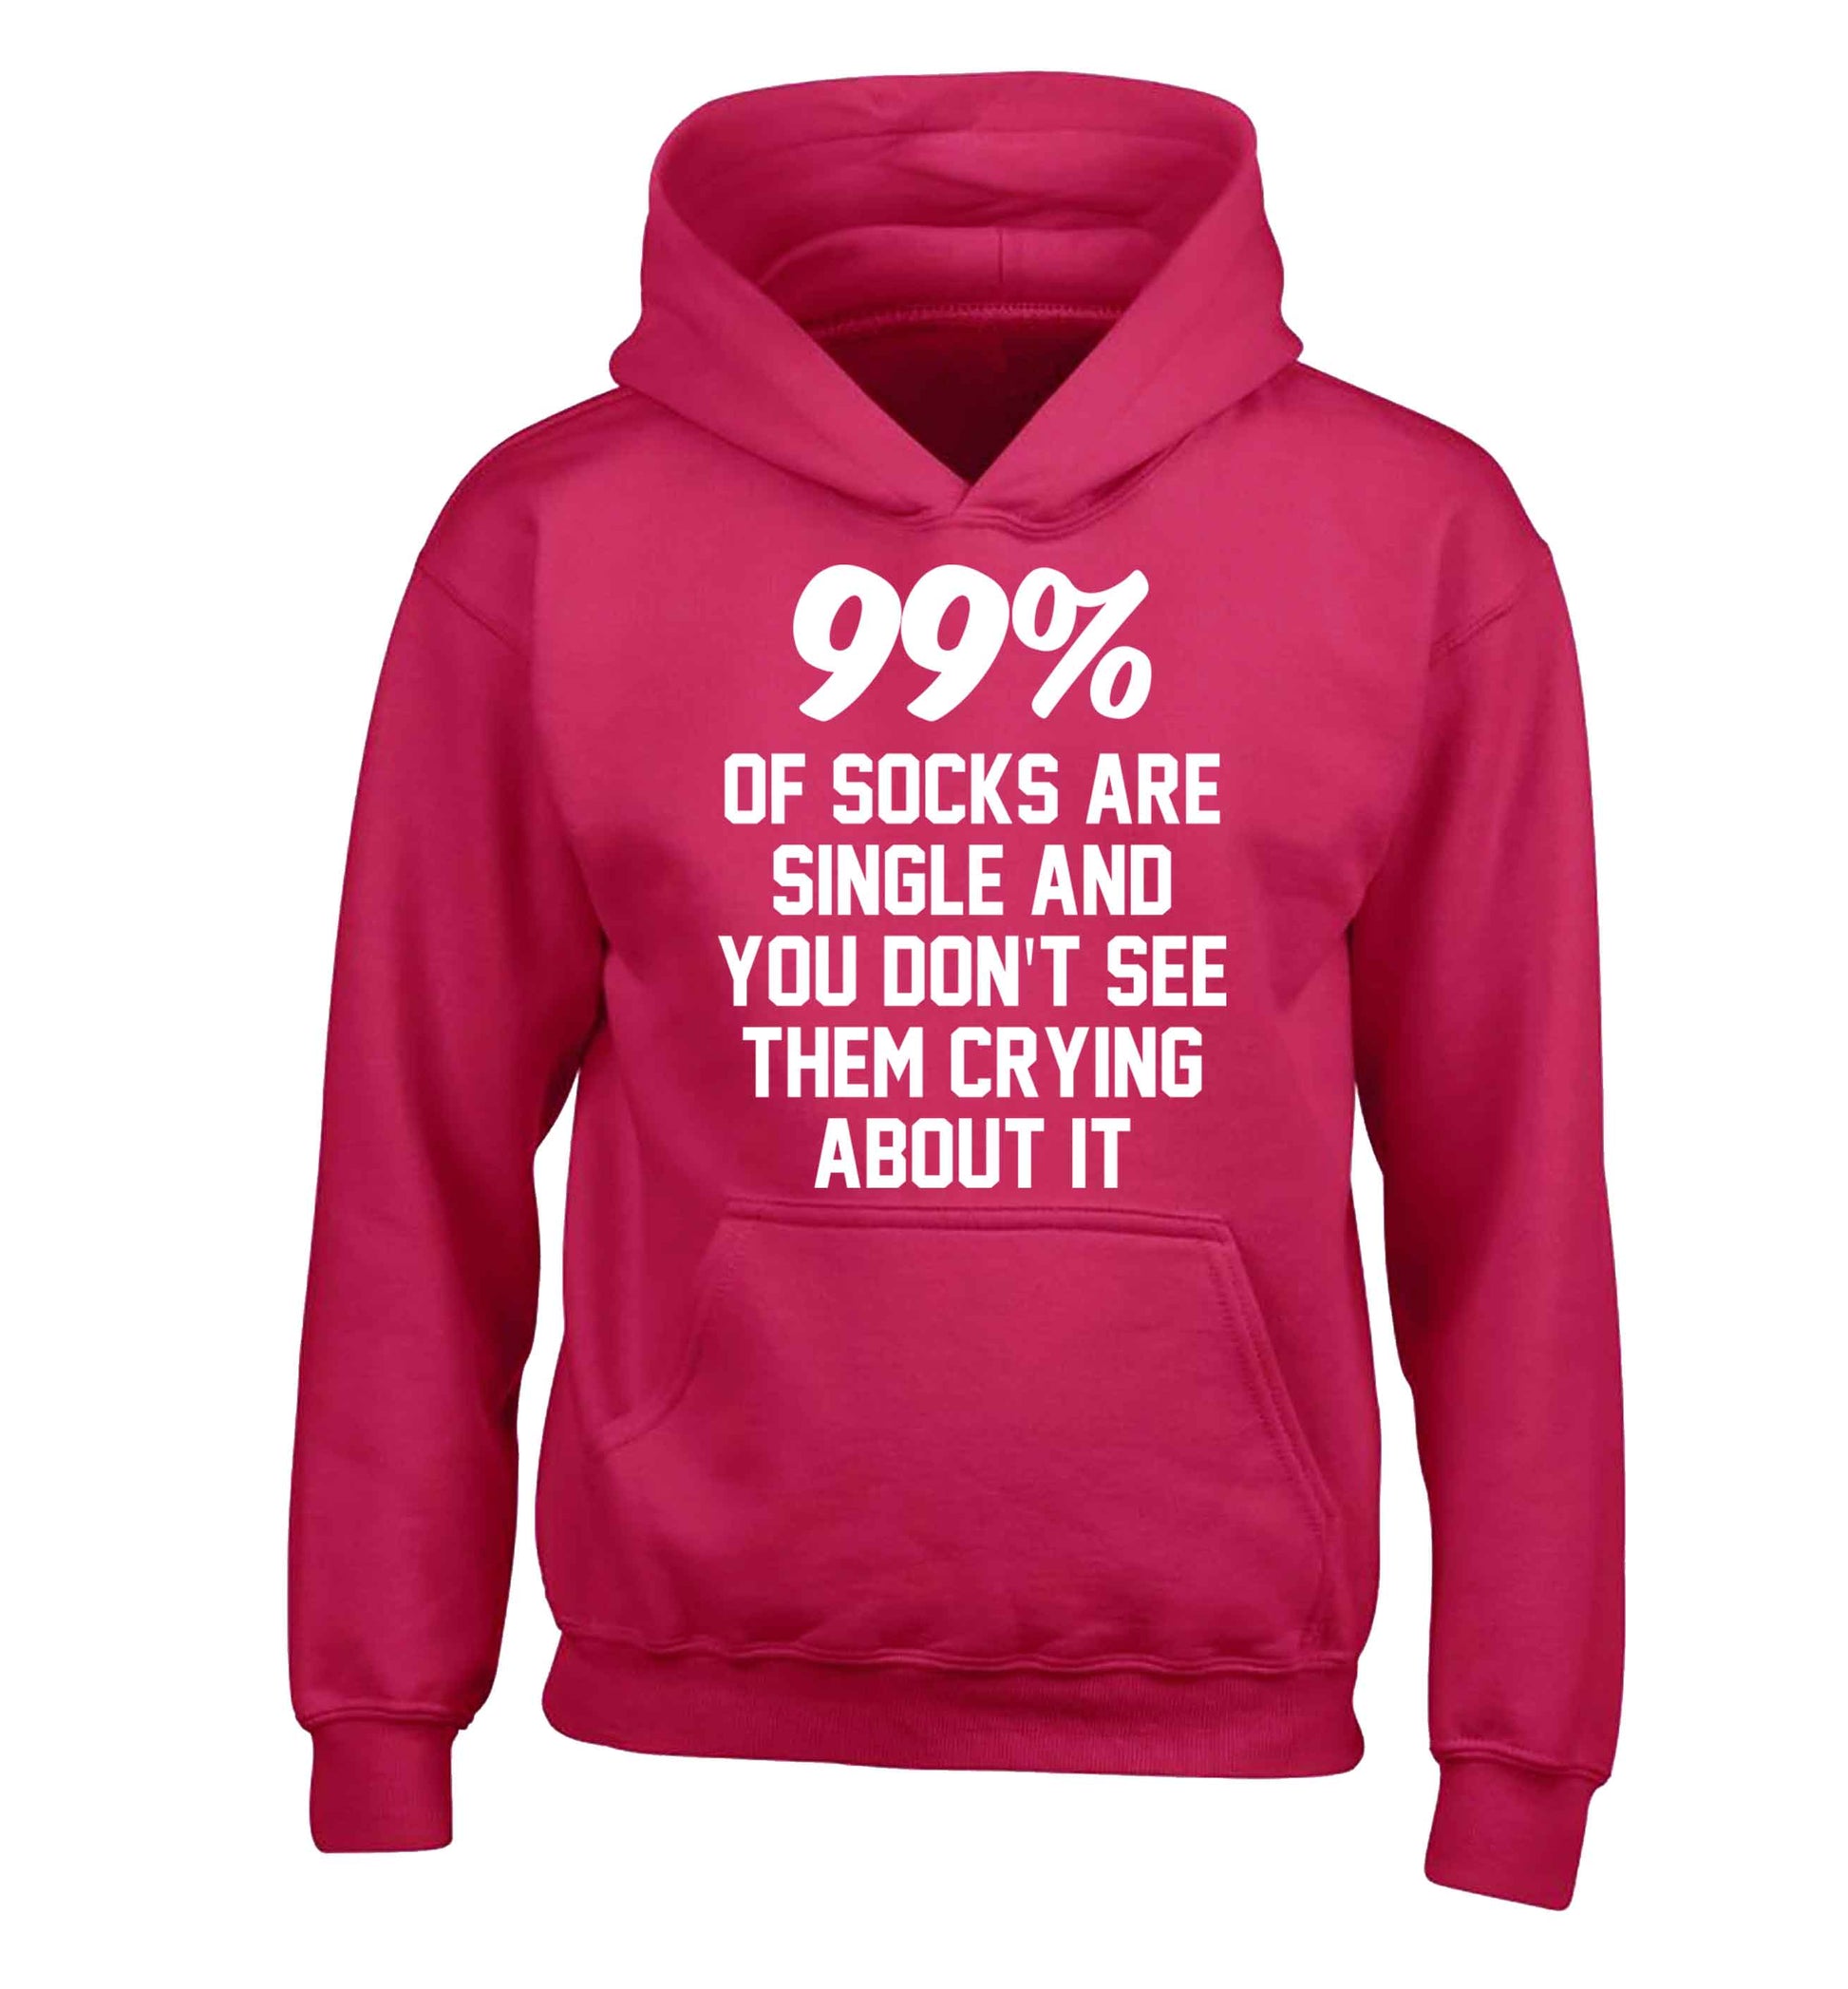 99% of socks are single and you don't see them crying about it children's pink hoodie 12-13 Years